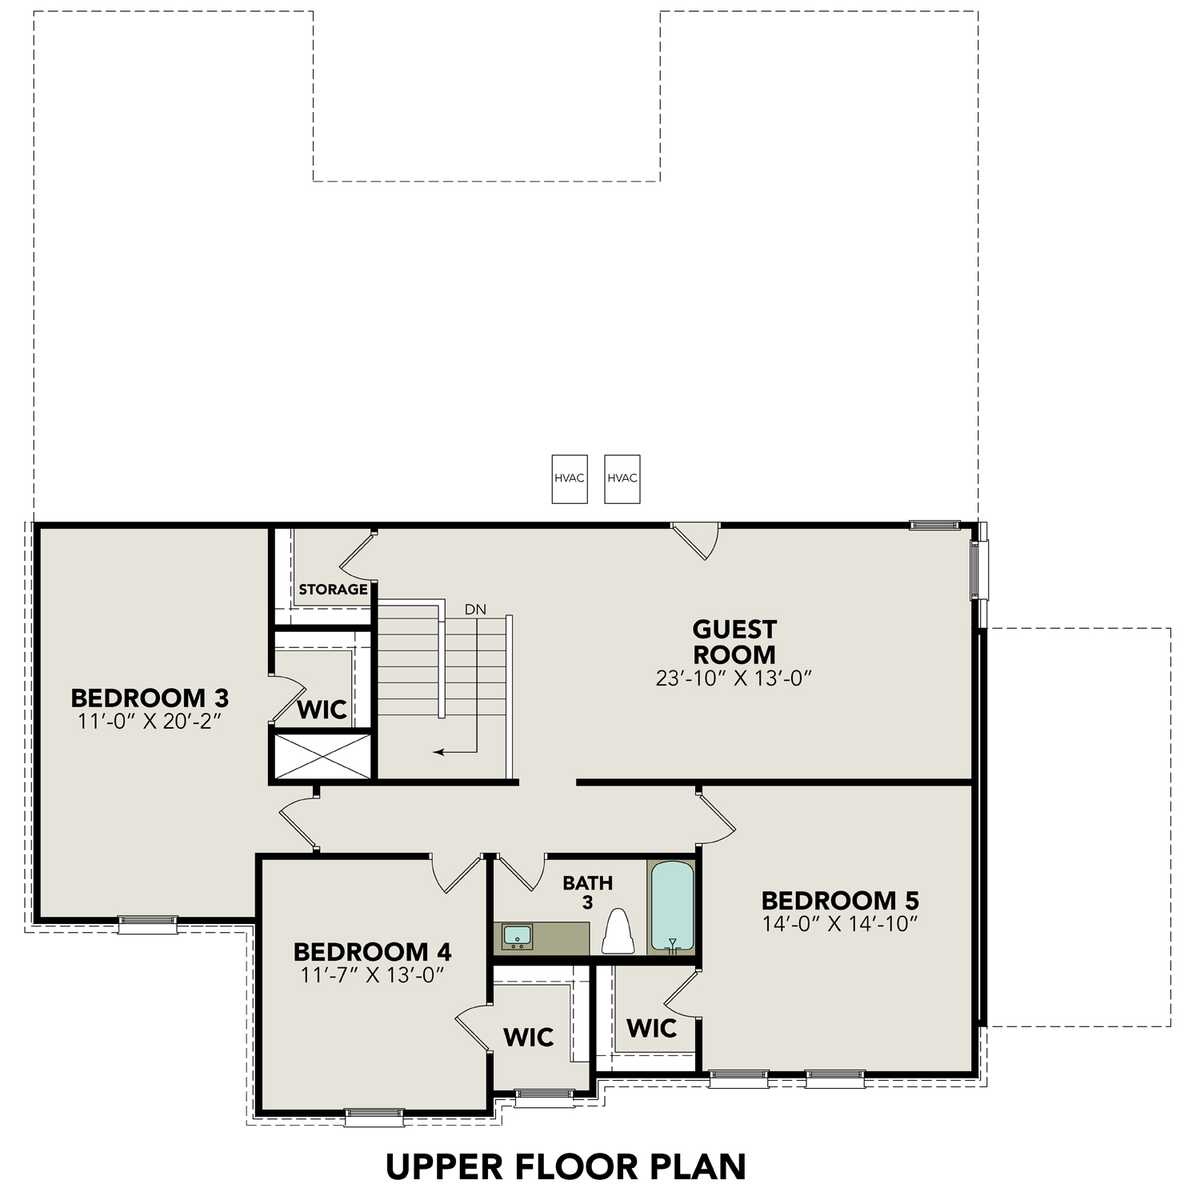 2 - The Jennings G floor plan layout for 248 Jereth Crossing in Davidson Homes' The Reserve at Potranco Oaks community.